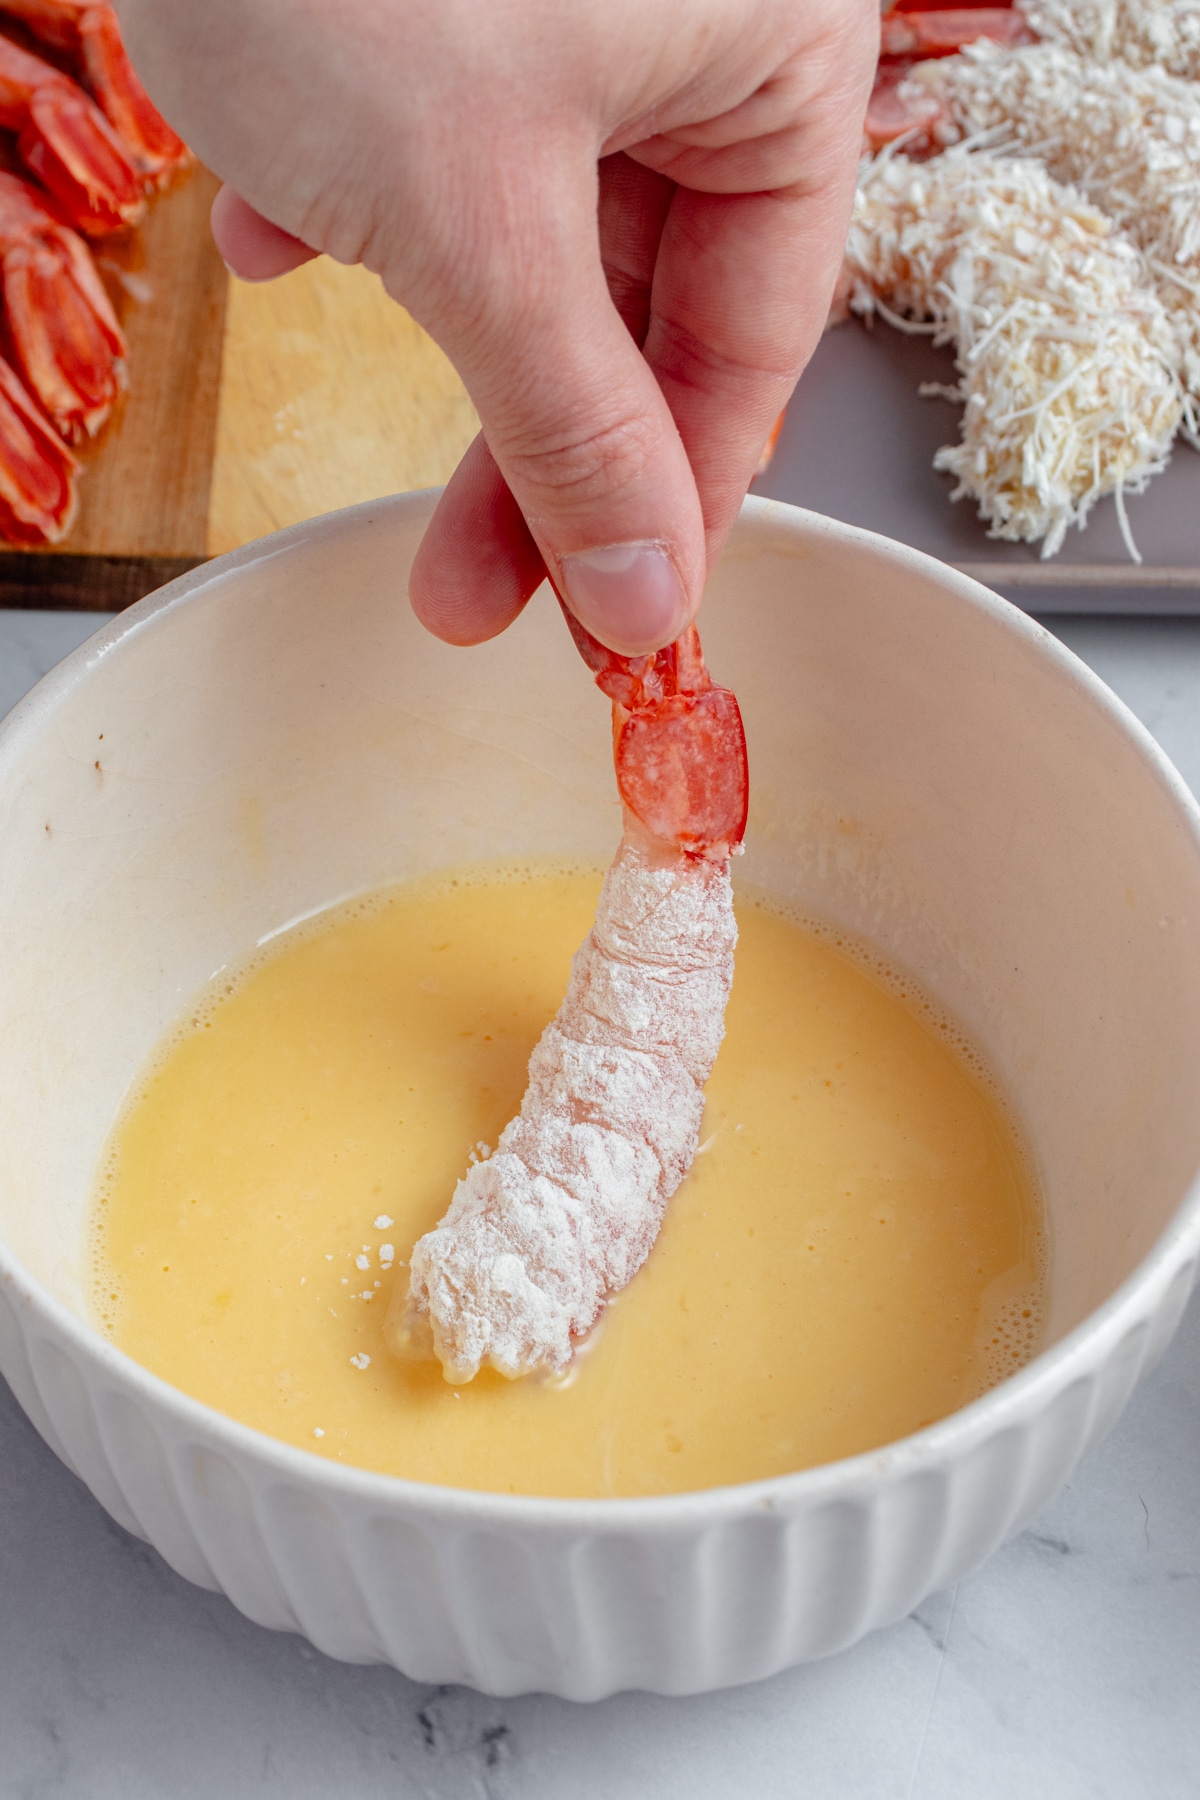 Shrimp being coated in an egg mixture.